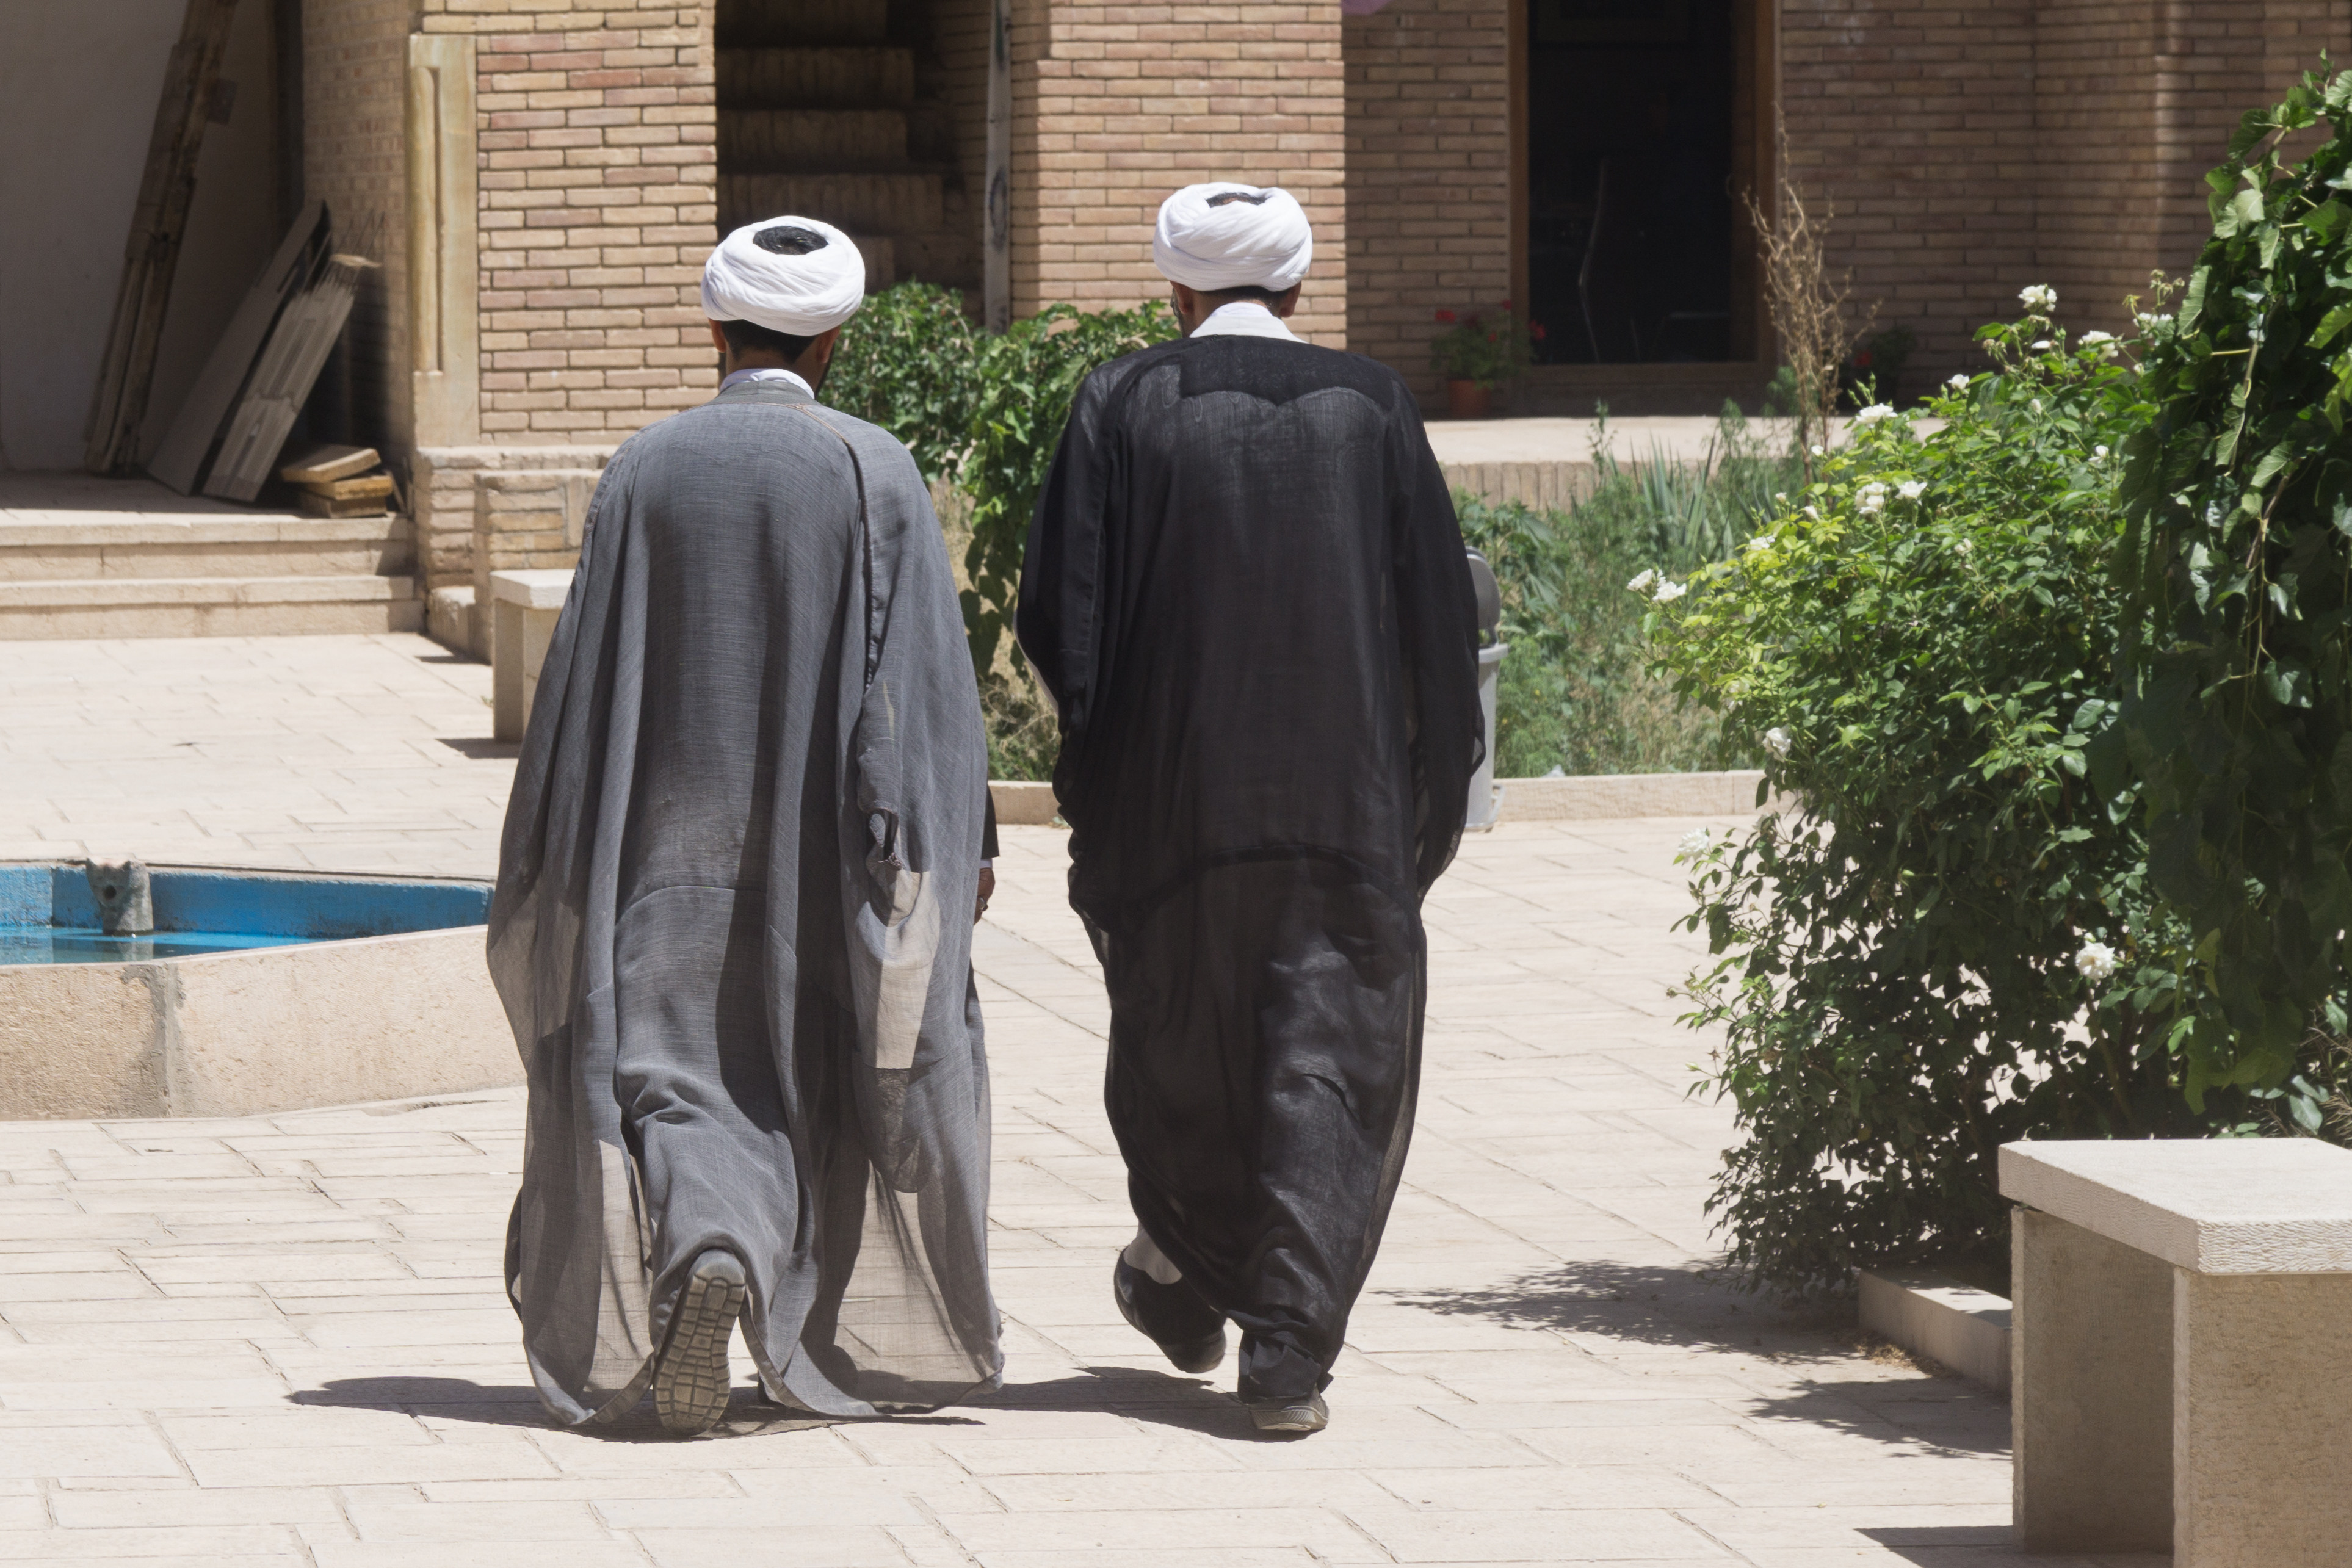 Protests over the death in custody of Mahsa Amini have gone global, but now tossing turbans of clerics has become a new protest act in Iran. Photo: Shutterstock/File